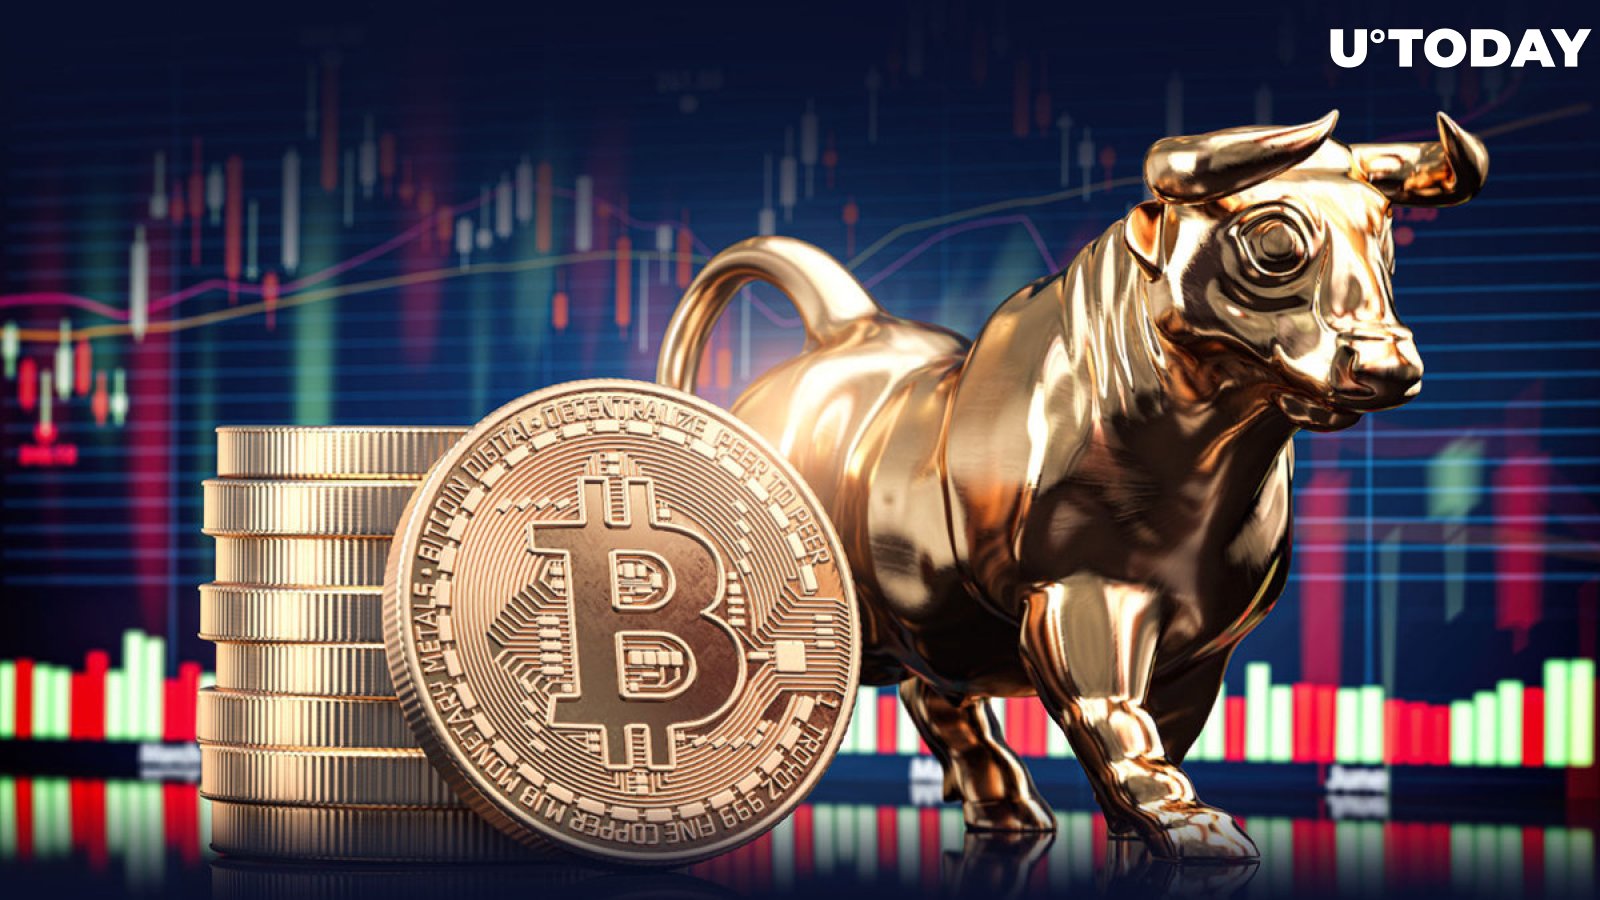 Bitcoin (BTC) on Course for $34,000, Thanks to This Bullish Pattern: Analyst